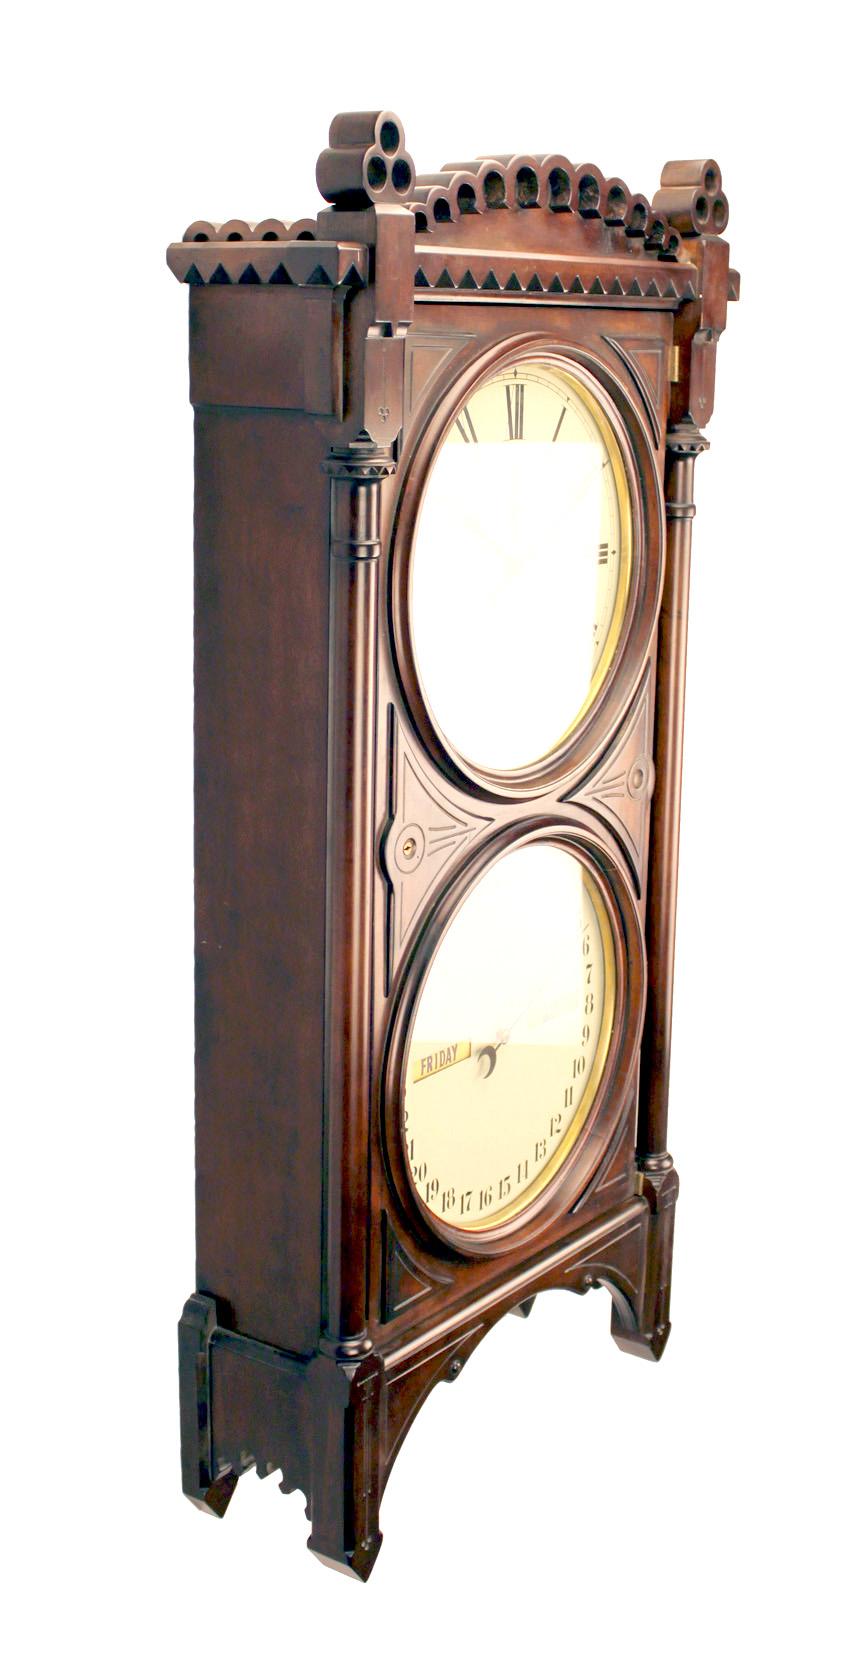  SETH THOMAS STYLE OFFICE CALENDAR REGULATOR No. 5 WALL CLOCK

Here is a beautiful office regulator calendar wall clock. The case is recently made with solid hard wood and in antique walnut finish. The entire clock is about 70 lbs, so you can tell